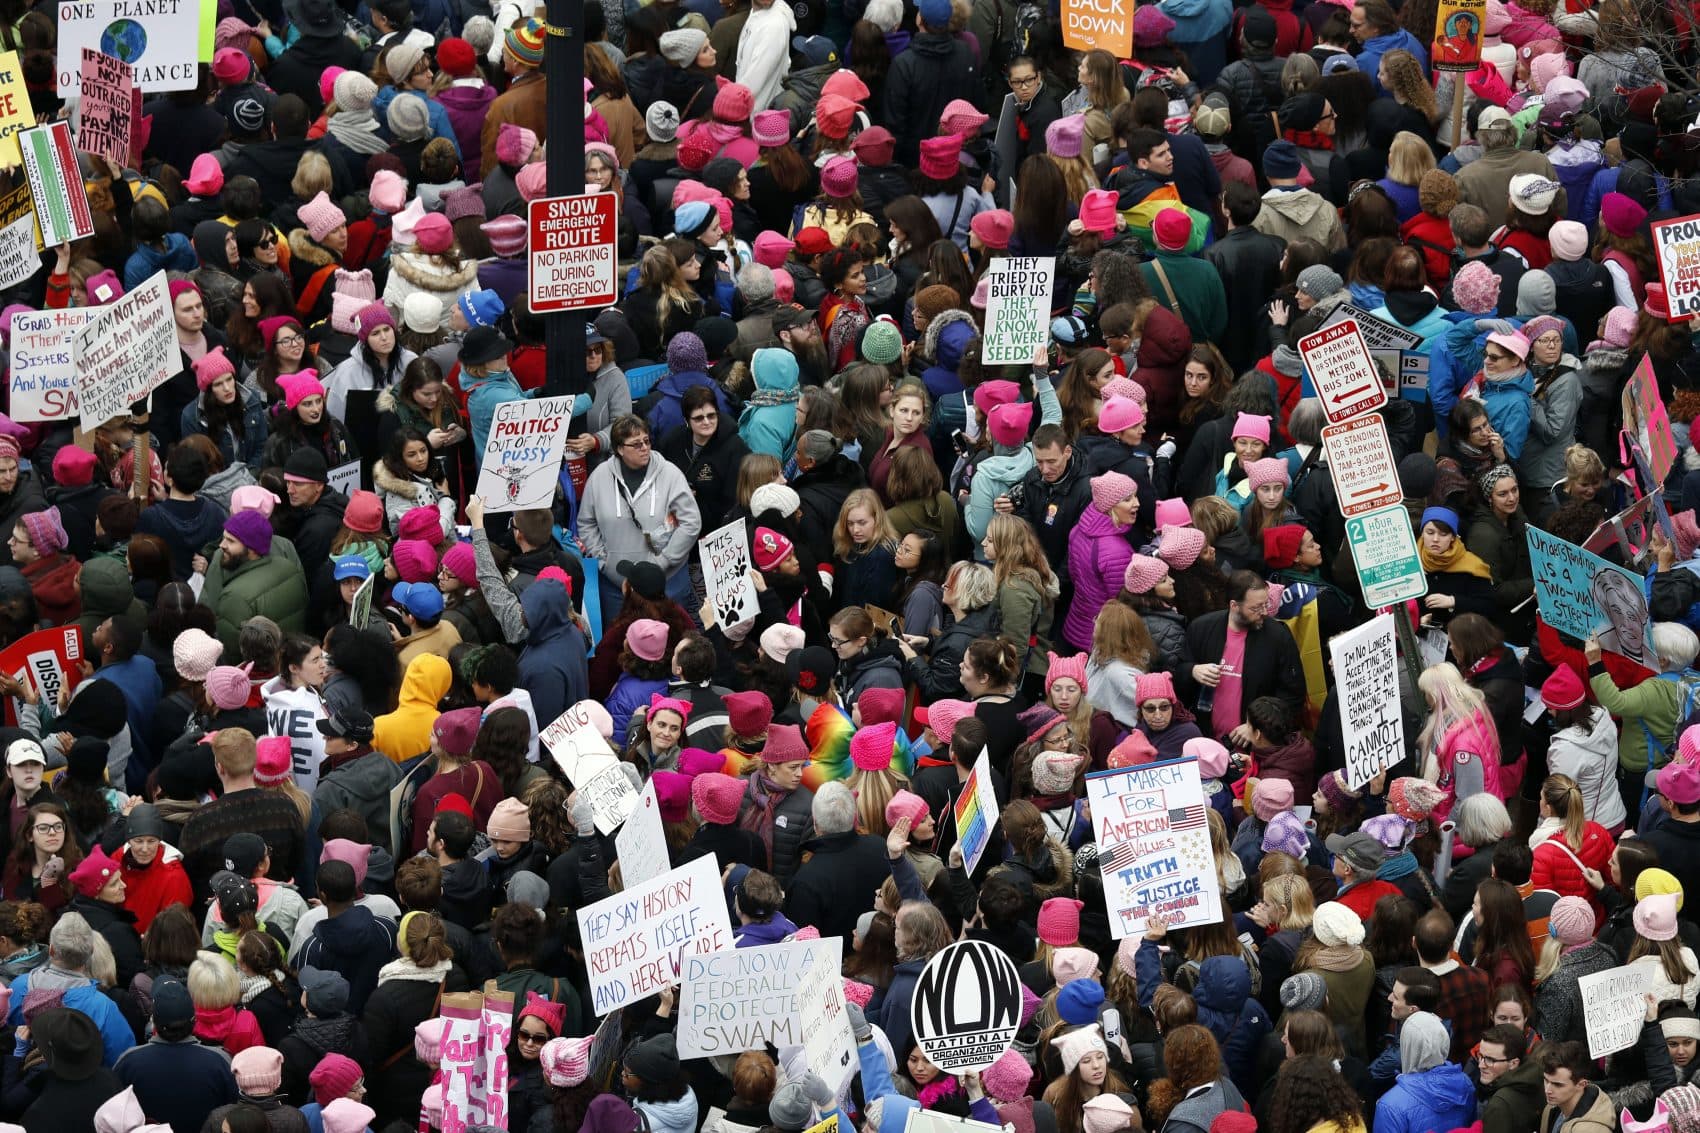 Margot Livesey writes that the Women's March in Washington -- a half-million protesters, no arrests -- demonstrates the power of bringing together people of different ages, colors, faiths and sexual orientations. A crowd packs Independence Avenue during the Women's March on Washington, Saturday, Jan. 21, 2017 in Washington. (Alex Brandon/AP) 